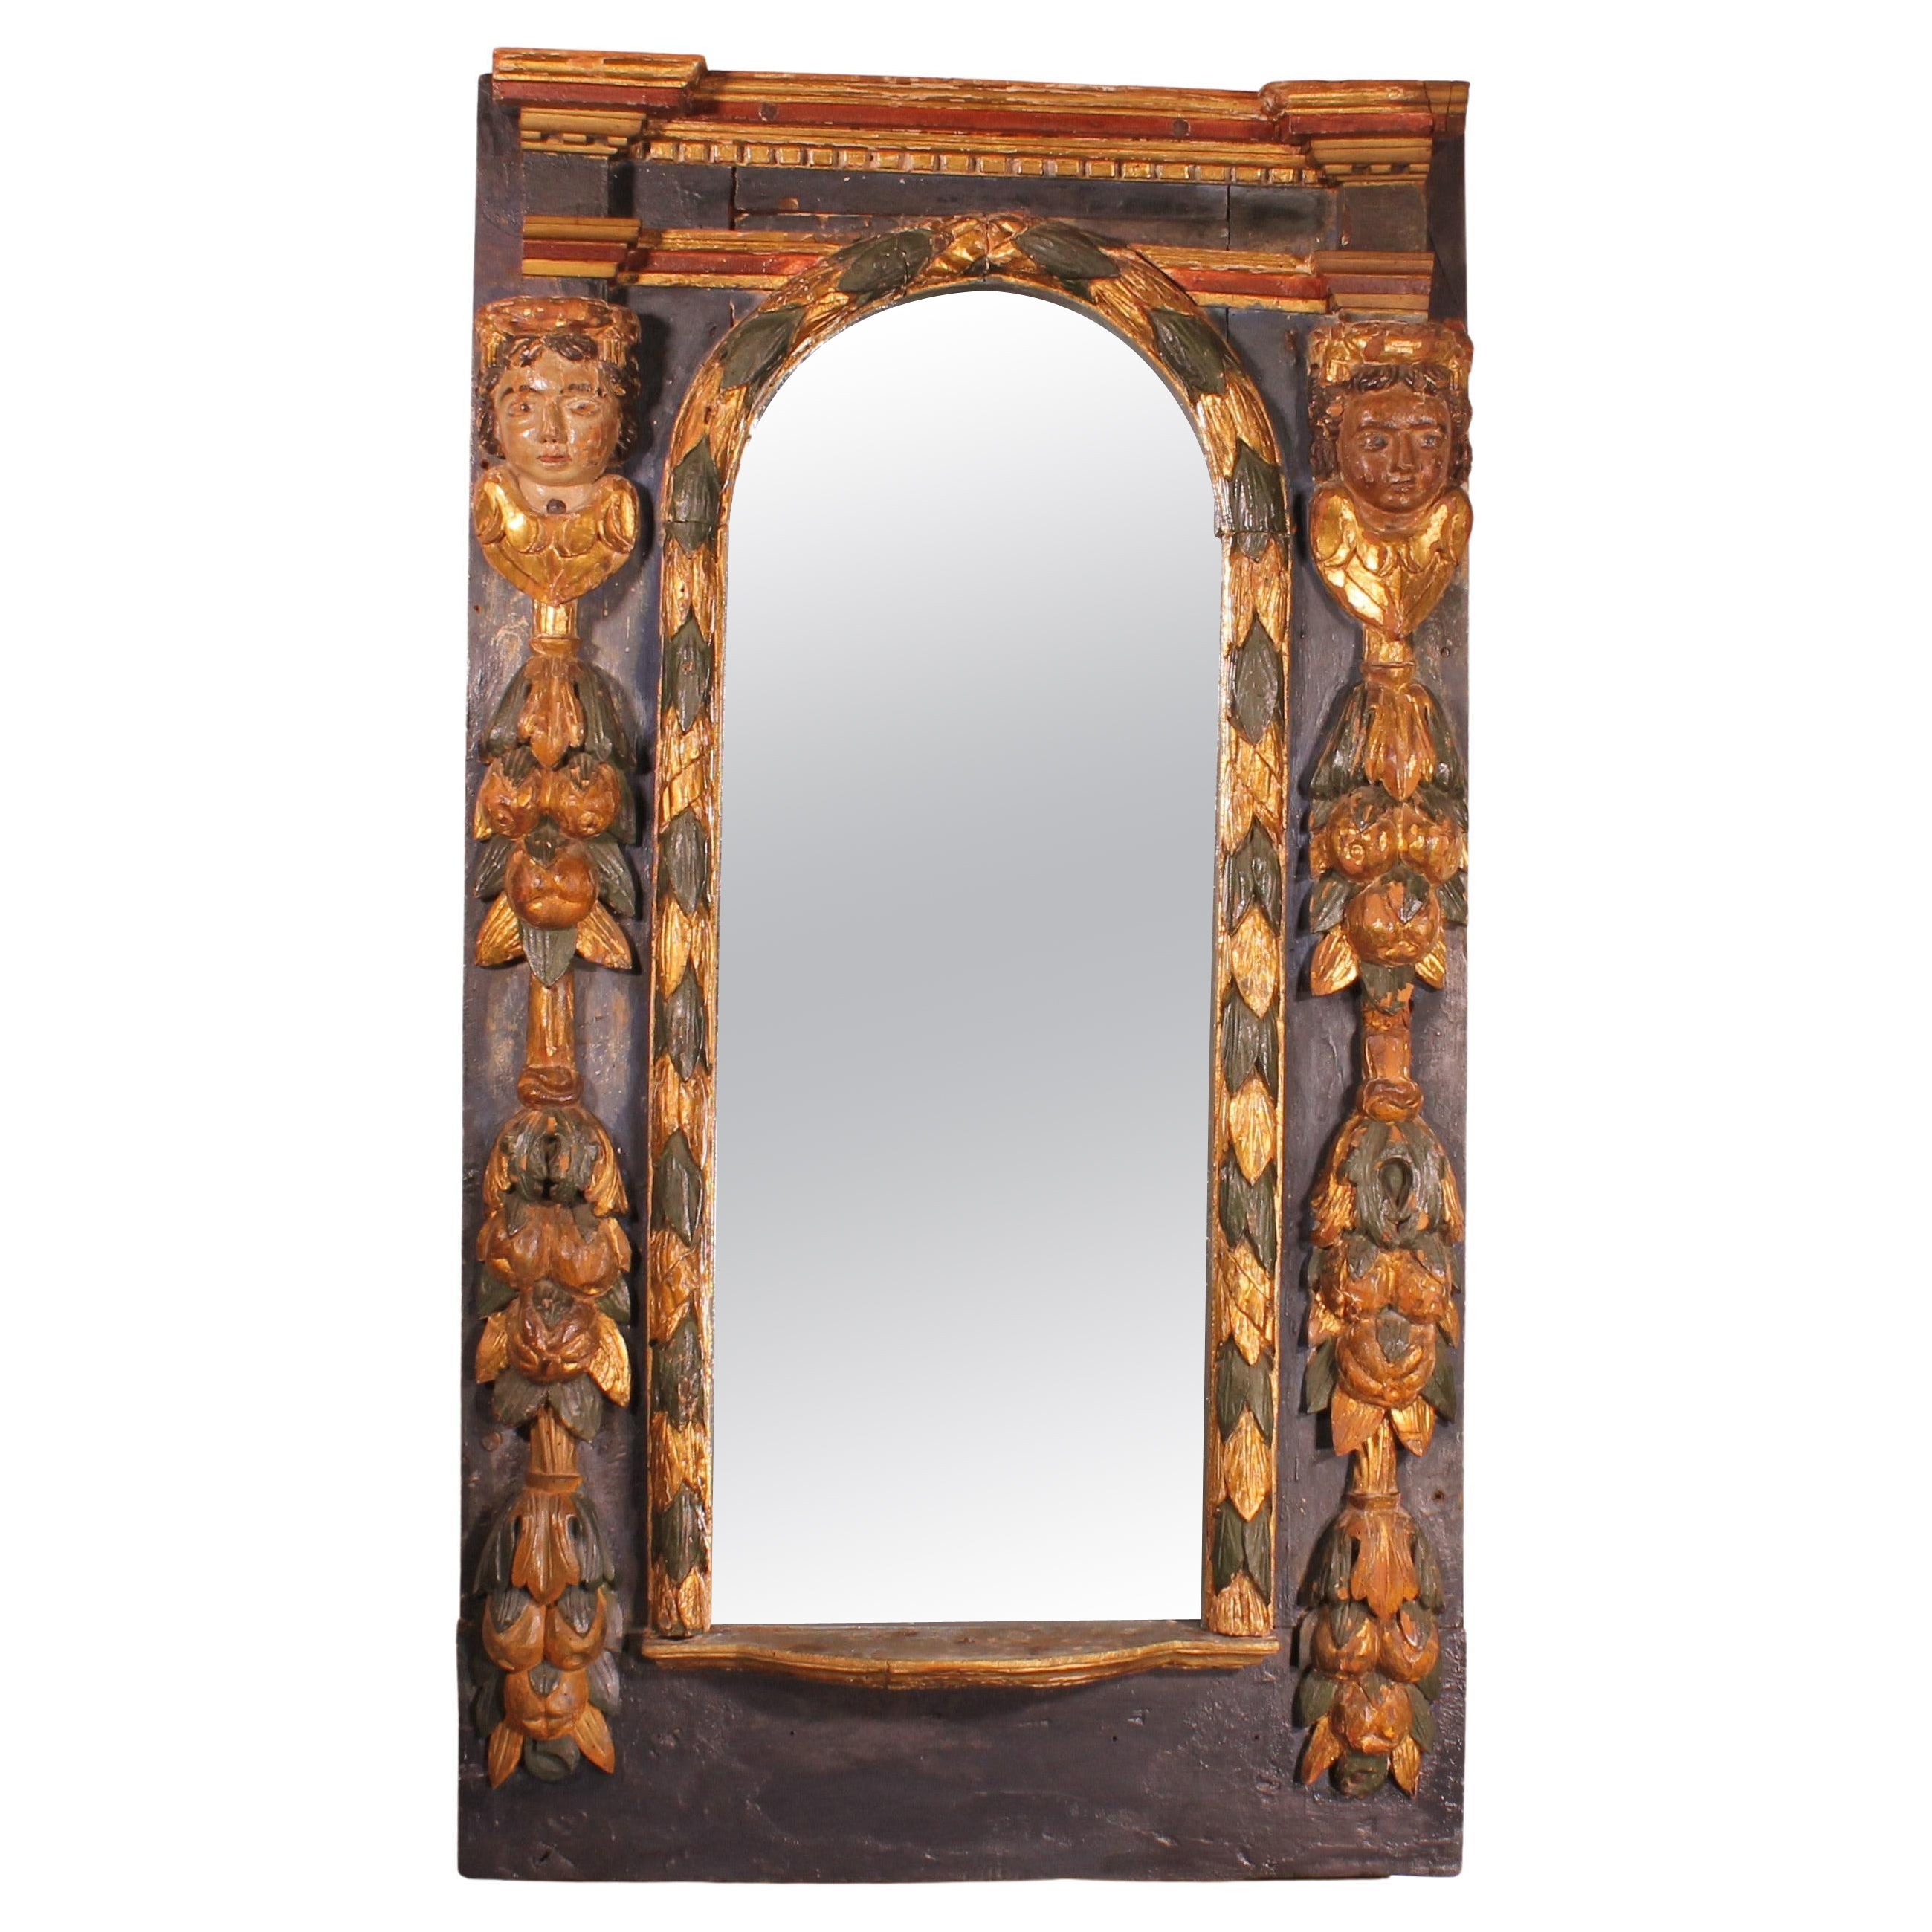 Large 17th Century Spanish Mirror In Polychrome Wood